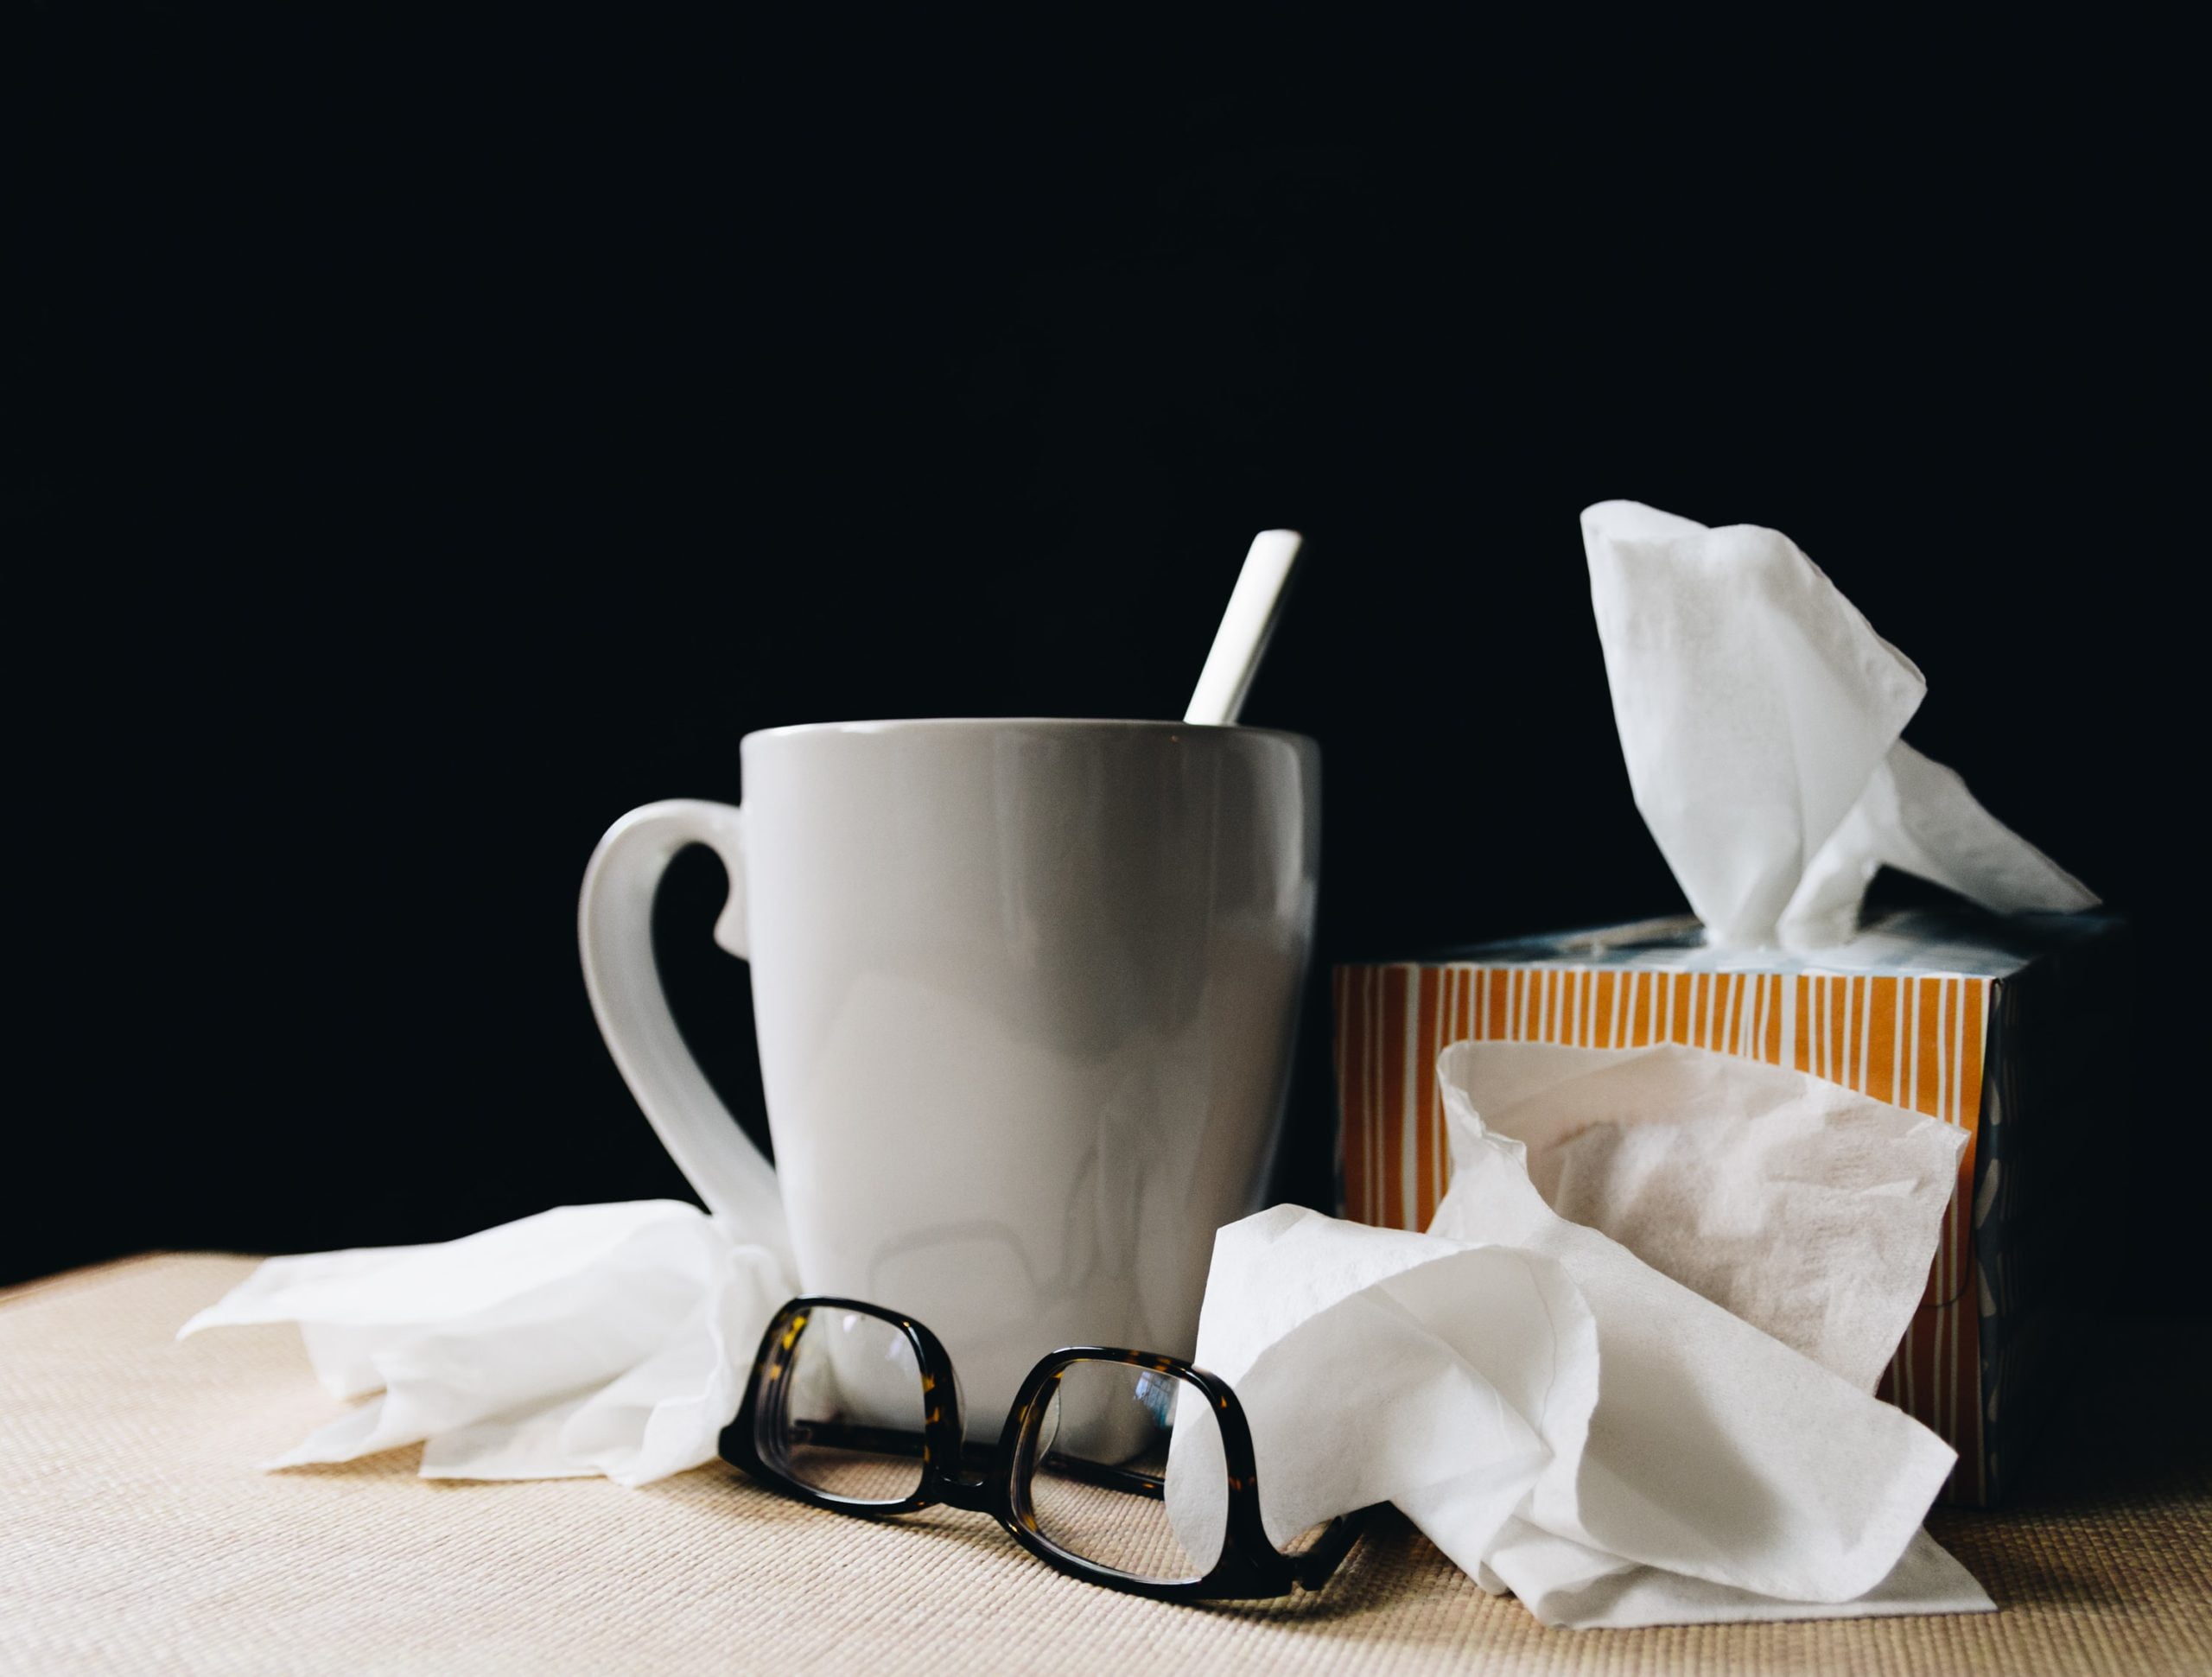 How to Deal with Employees on Long Term Sick Leave